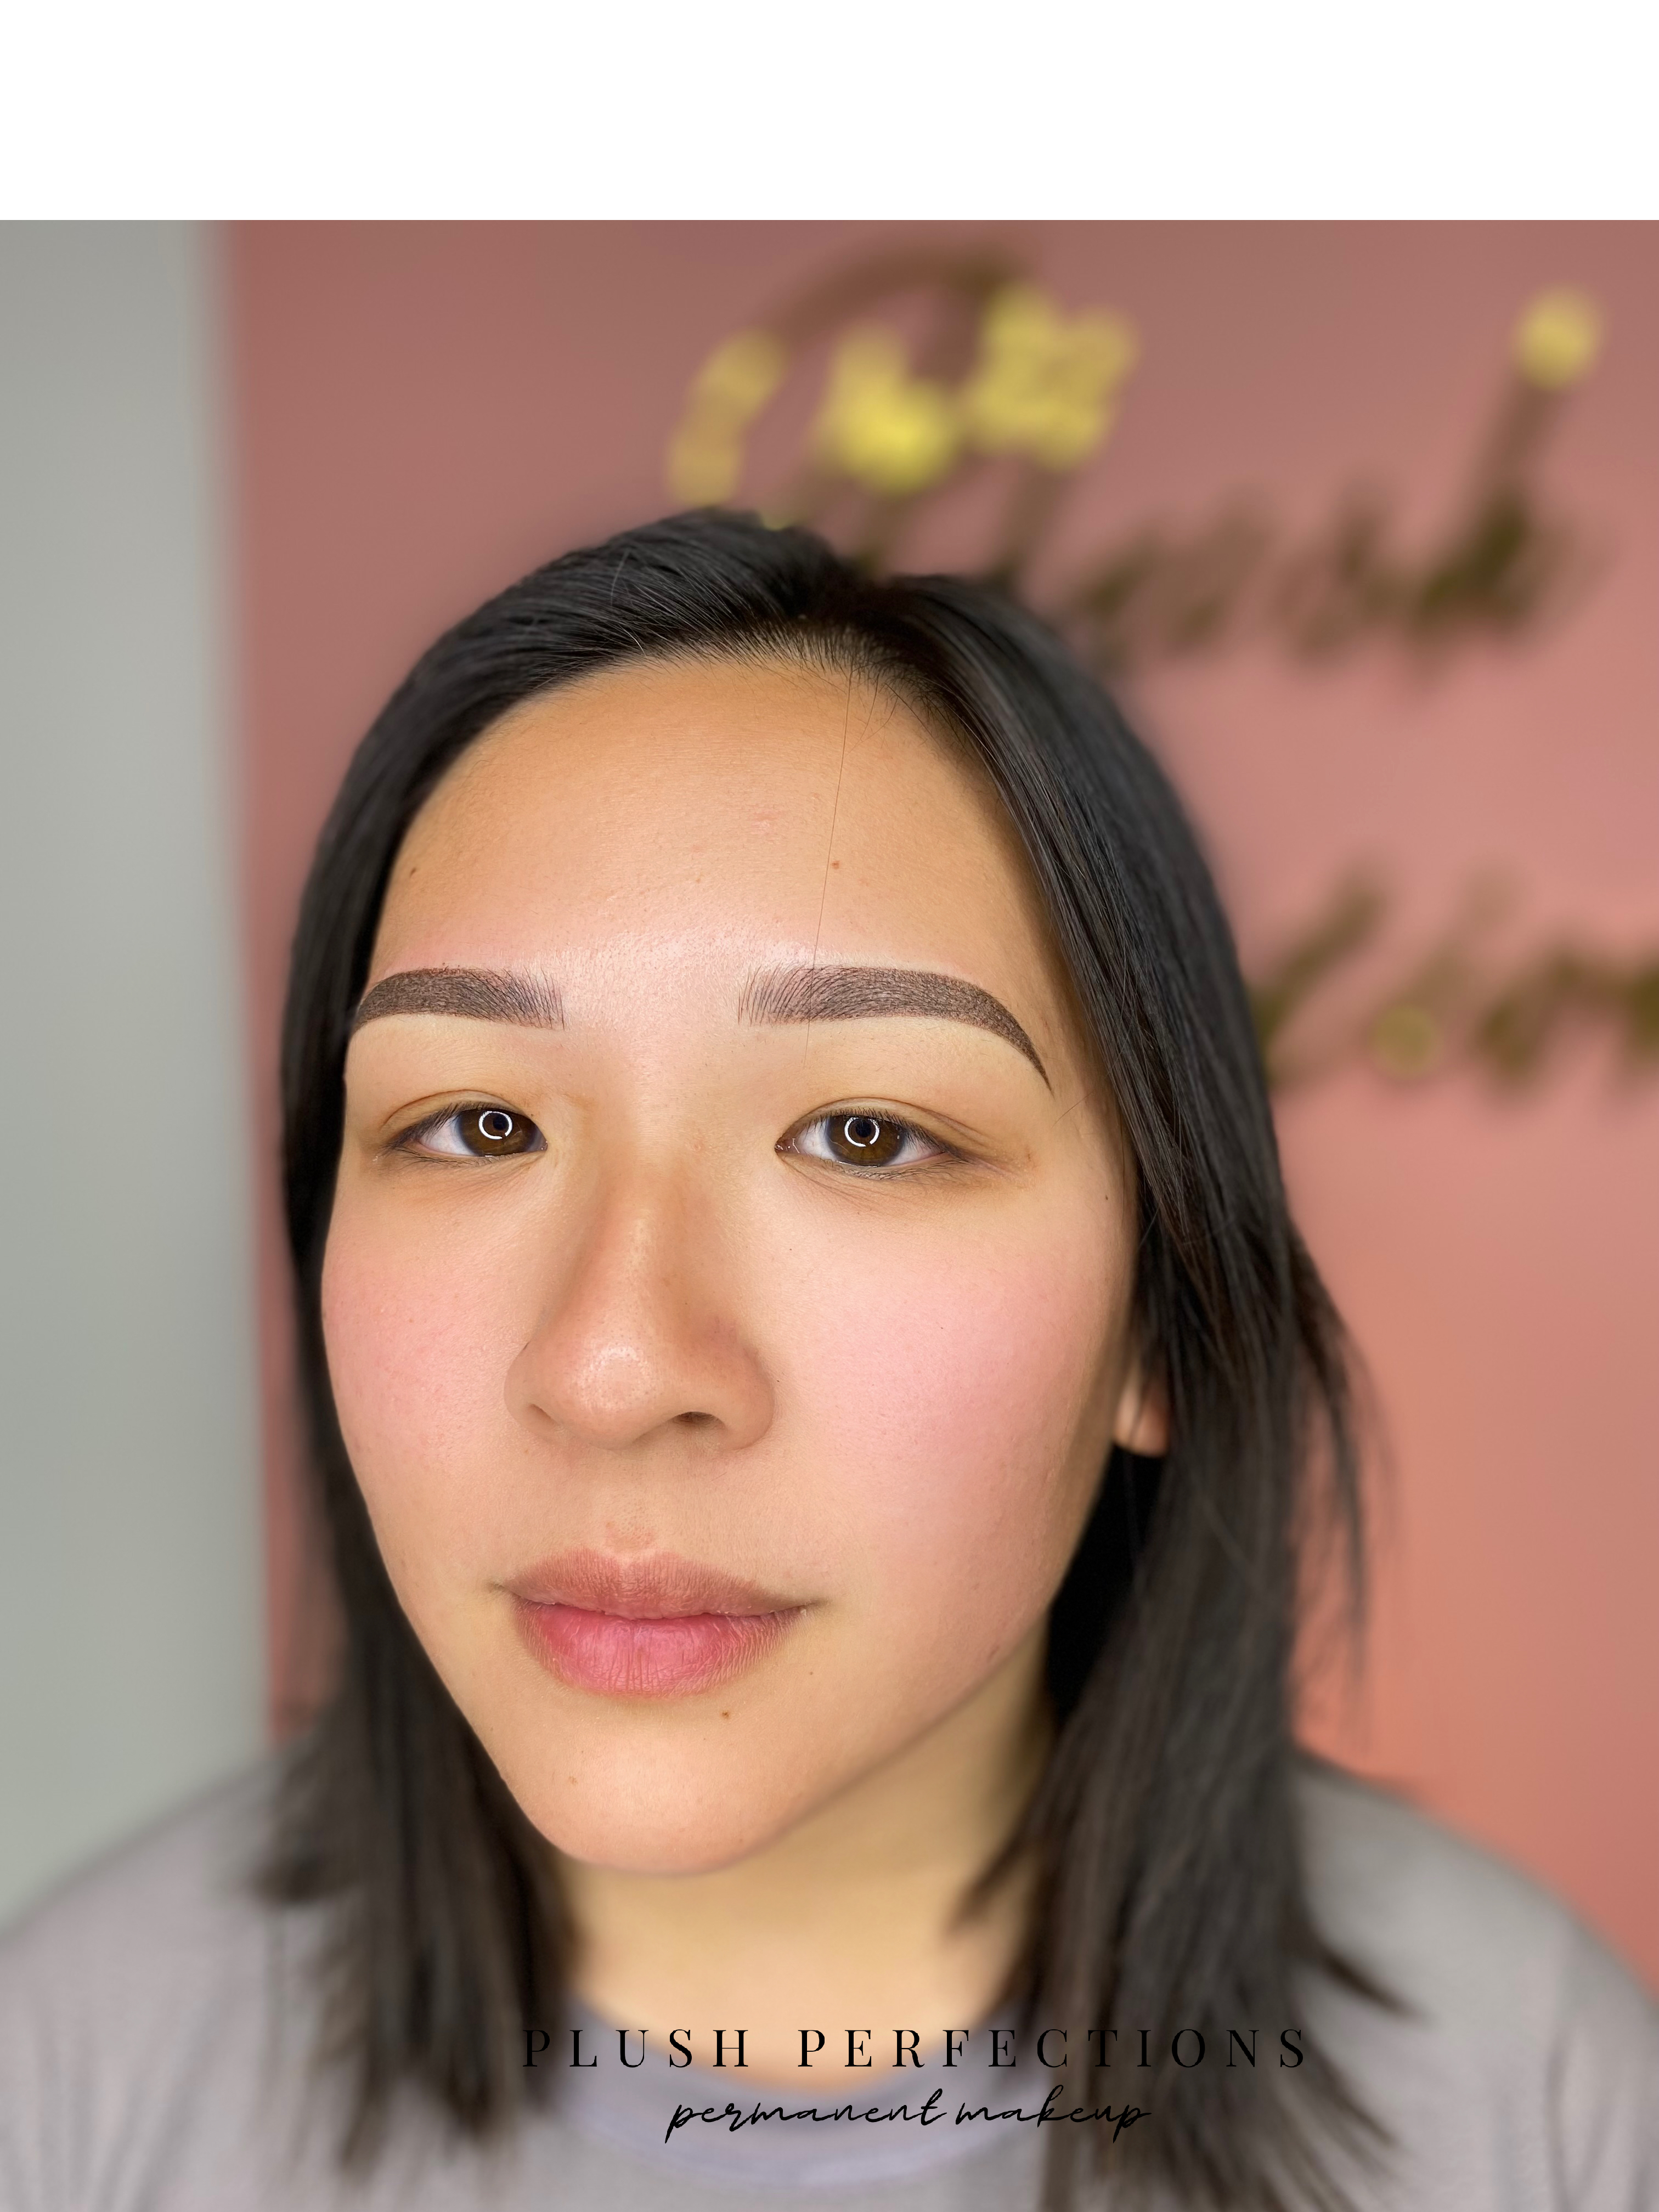 Combination Eyebrow Near me Vancouver Plush Perfections